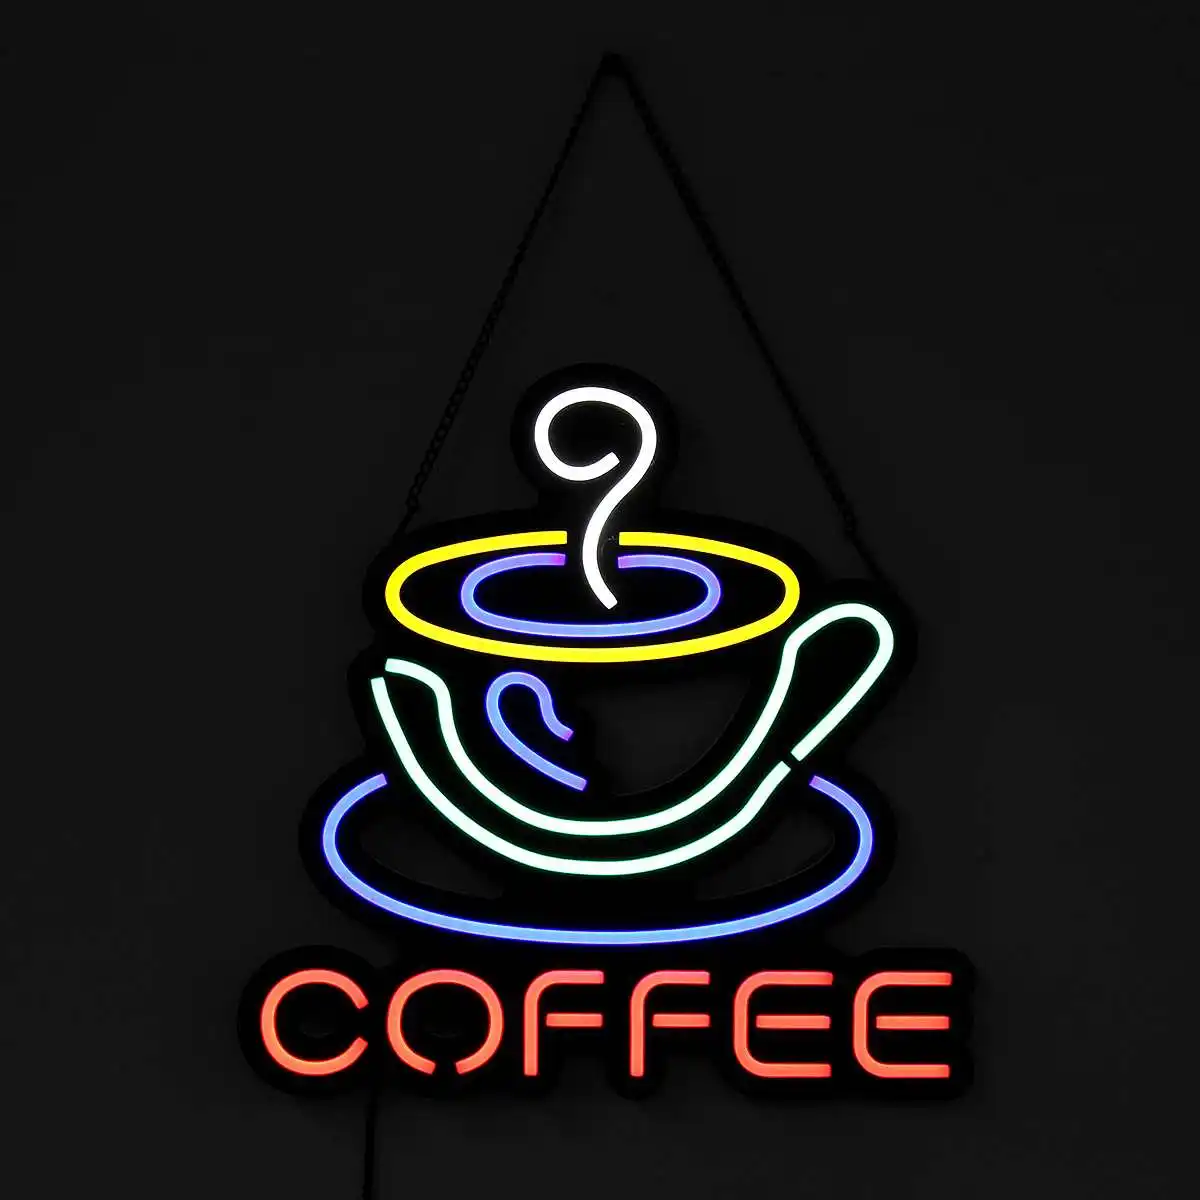 COFFEE LED Neon Sign Light Hanging Party Bar Club Visual Artwork Lamp Wall Decoration Commercial Lighting Neon Bulbs AC110-240V